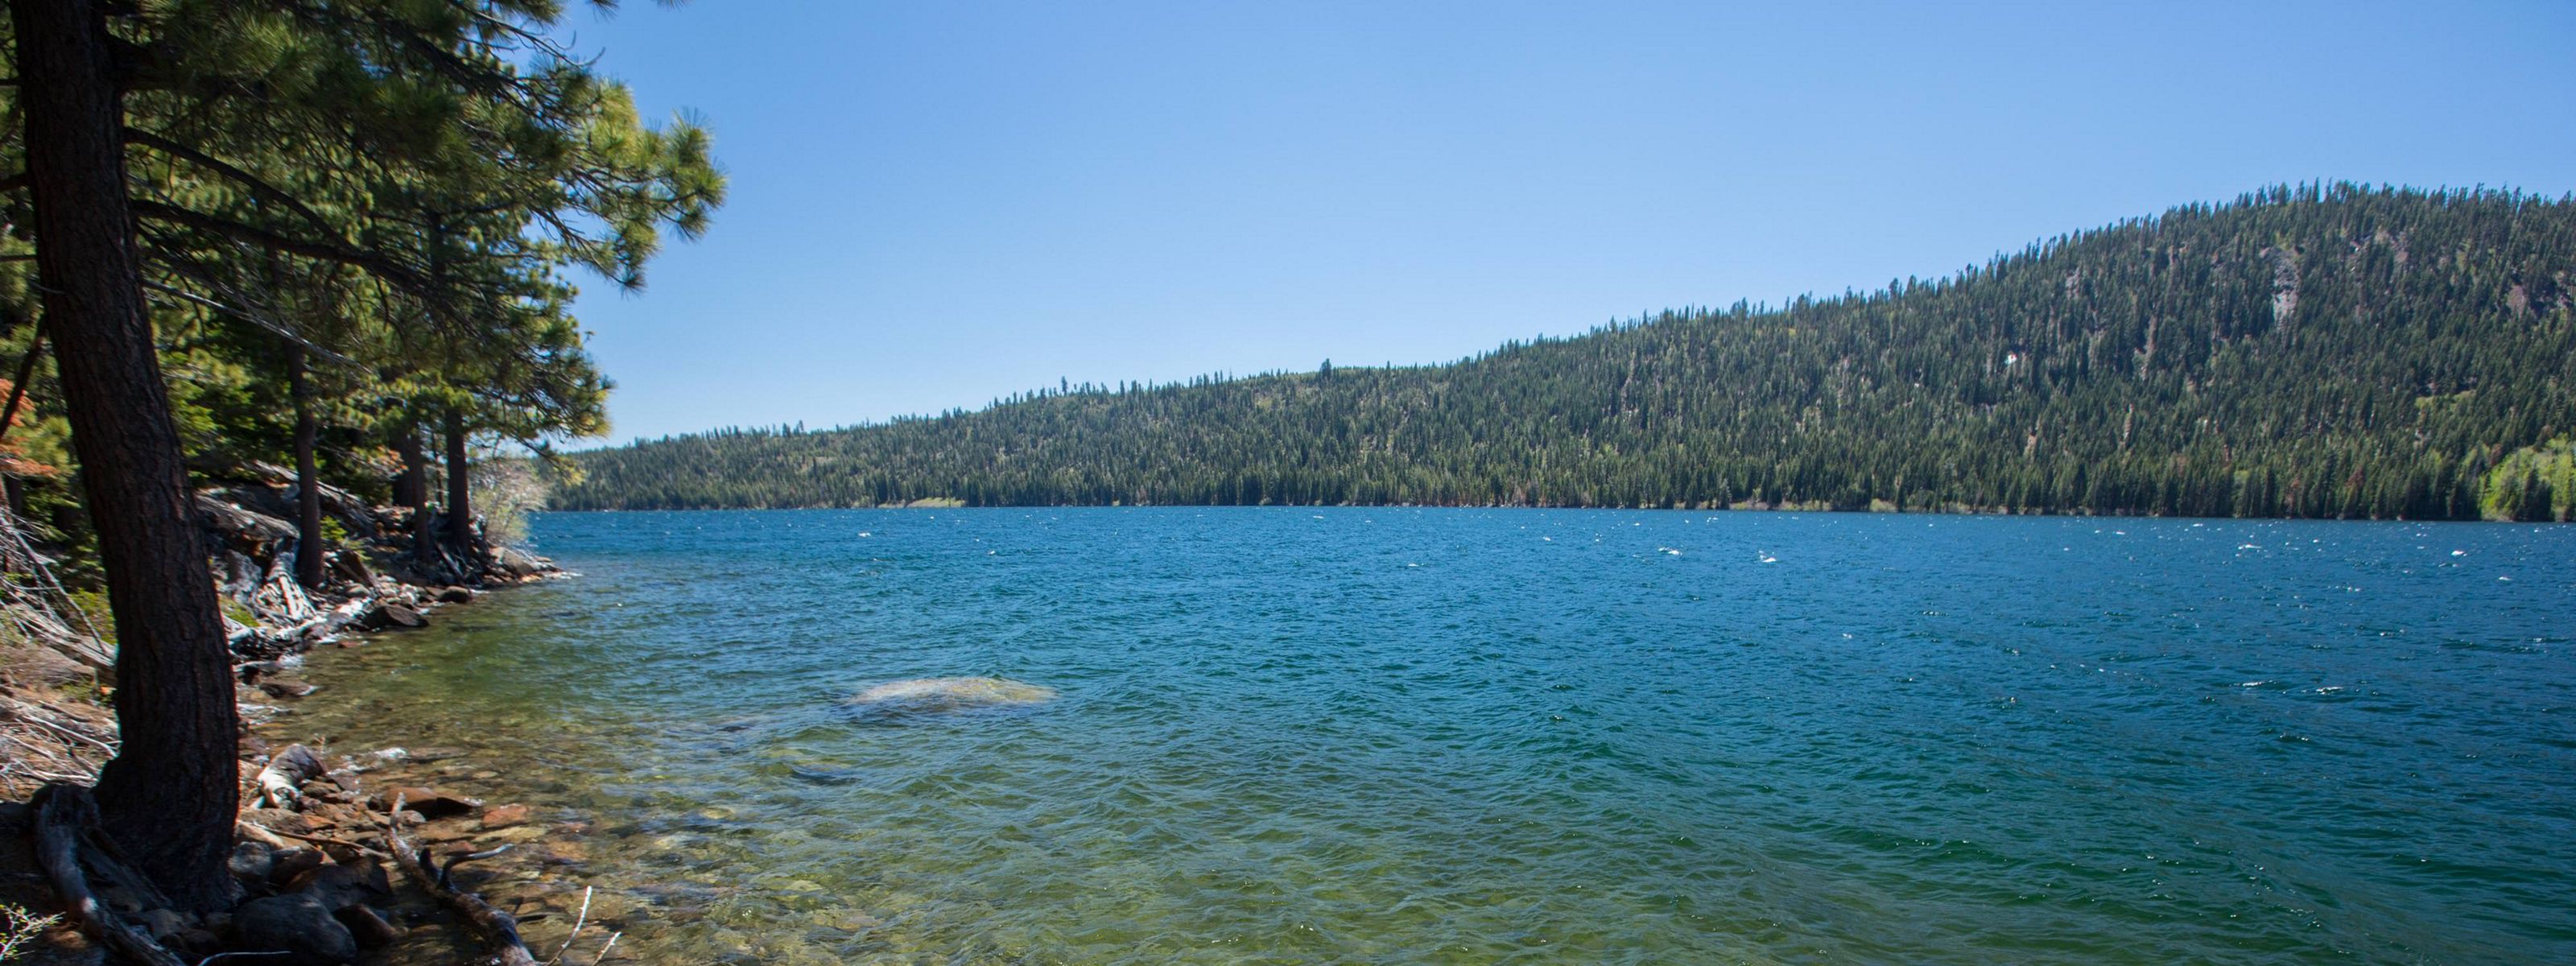 Blue and green lake with trees along the shoreline.